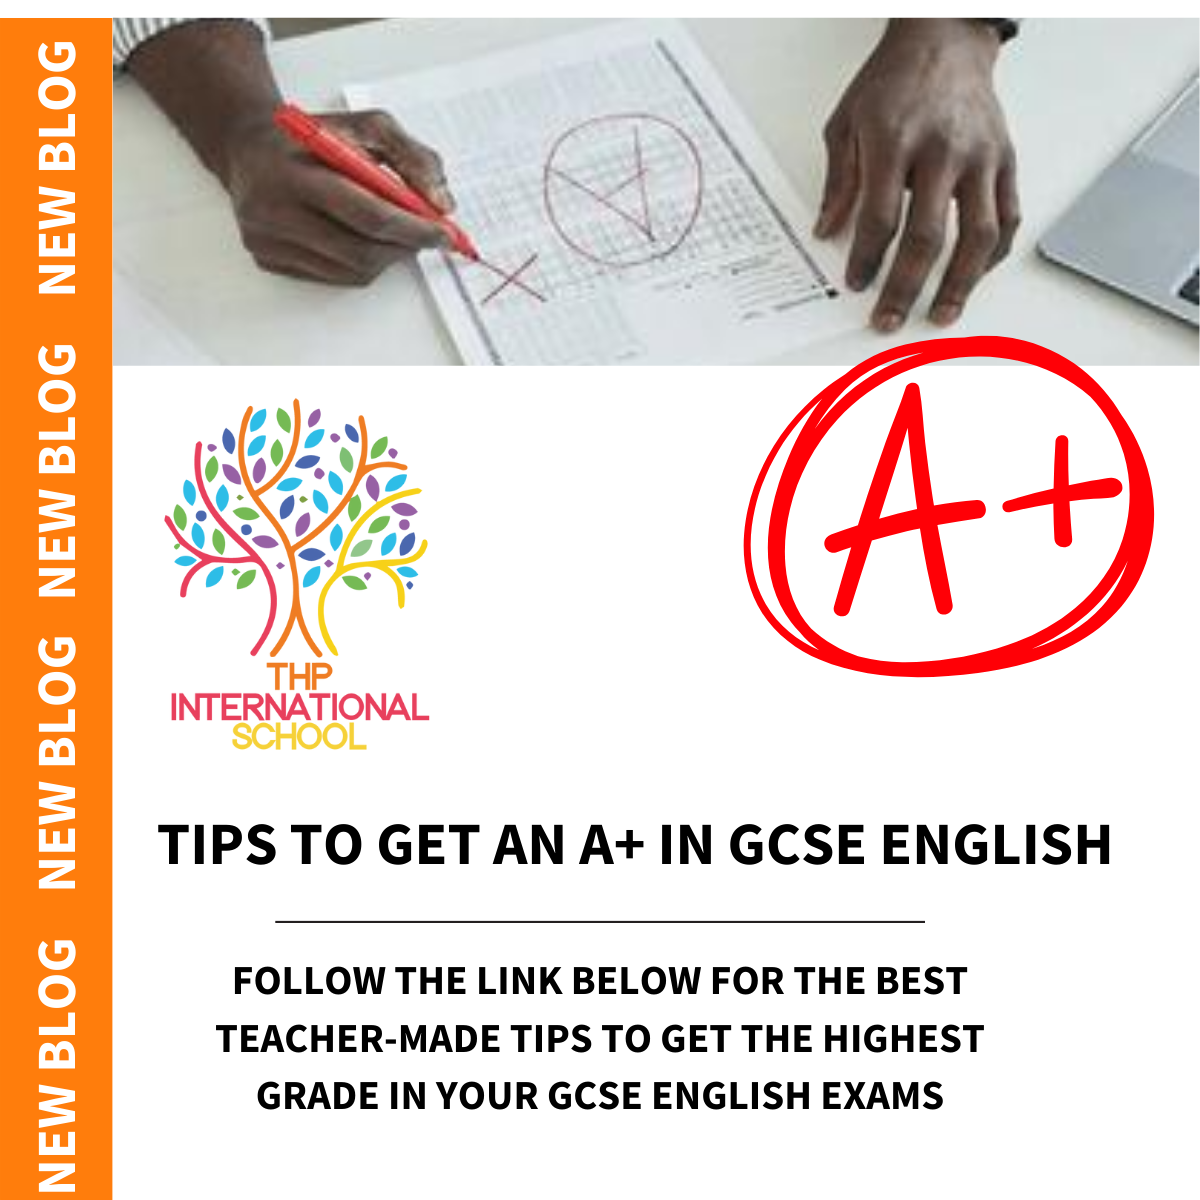 TIPS TO GET AN A+ IN GCSE ENGLISH